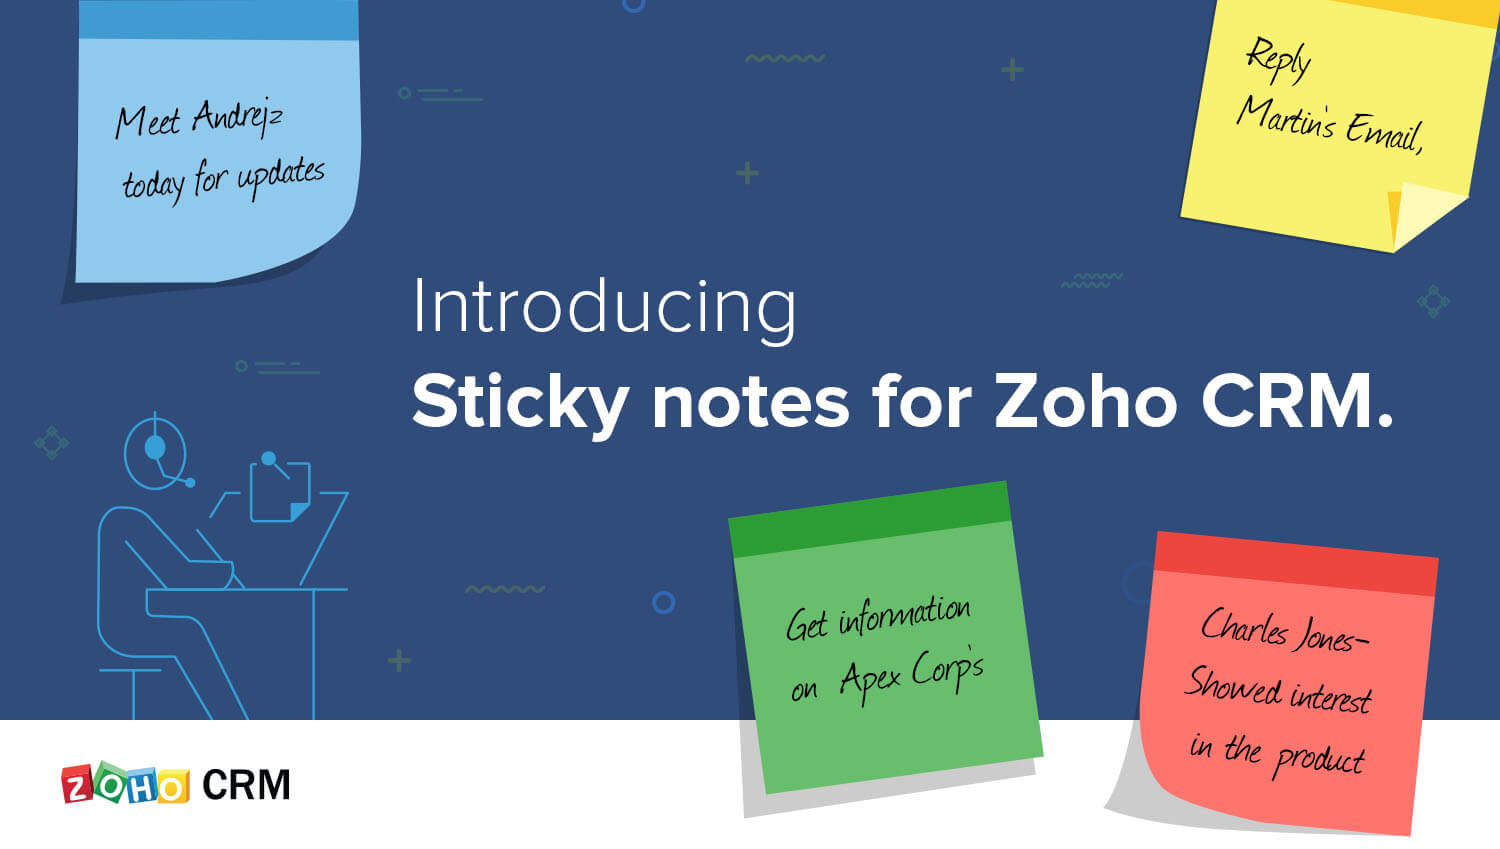 Introducing Zoho CRM's sticky notes